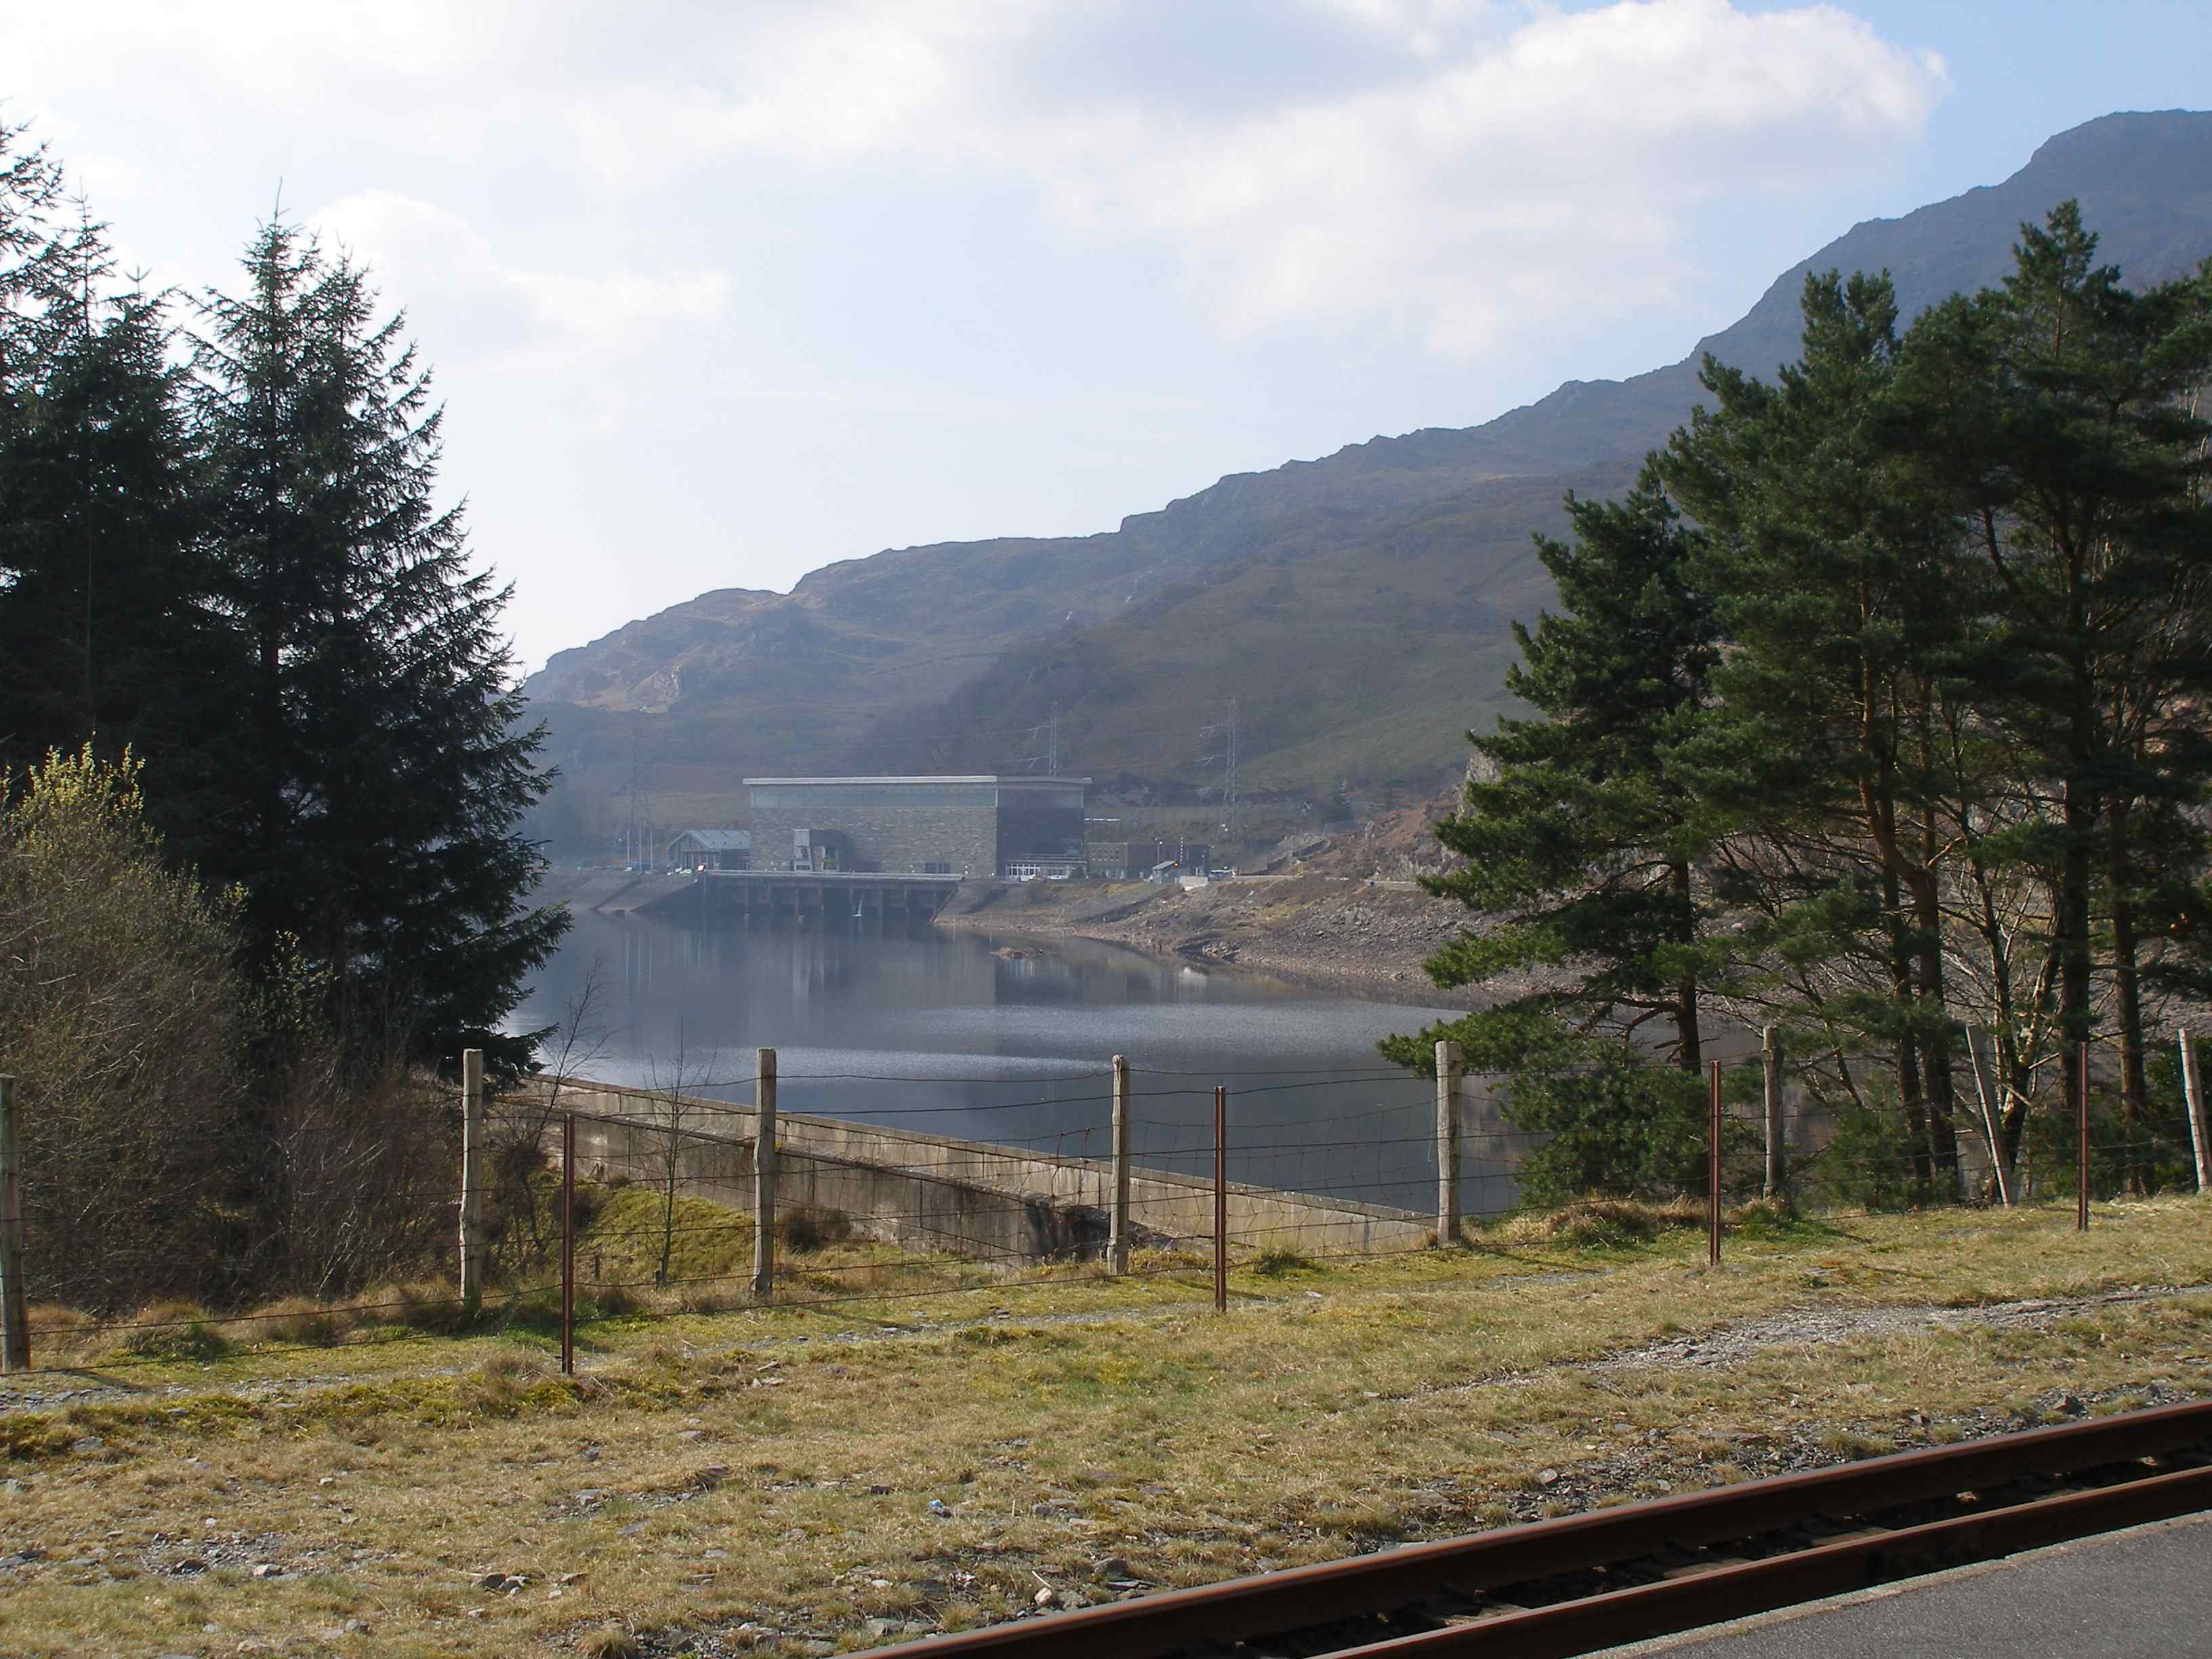 The pumped-hydro electric power station from Tan-y-Grisiau station. The line used to run along the road leading to the power station and then through the actual site - the old cutting on the other side is still visible. The new line now climbs from the station before emerging just below the roof line of the Power Station, level with the upper windows. The ballast bed can just be made out. Commissioned in 1963, Ffestiniog Power Station was the UK's first major pumped storage power facility. Although of an older generation to those at Dinorwig, Ffestiniog's four generating units are still capable of achieving a combined output of 360MW of electricity - enough to supply the entire power needs of North Wales for several hours. The Generation Cycle begins at Llyn Stwlan - Ffestiniog's upper reservoir. Large screens inside the intake towers are opened to activate the high-pressure downflow. 